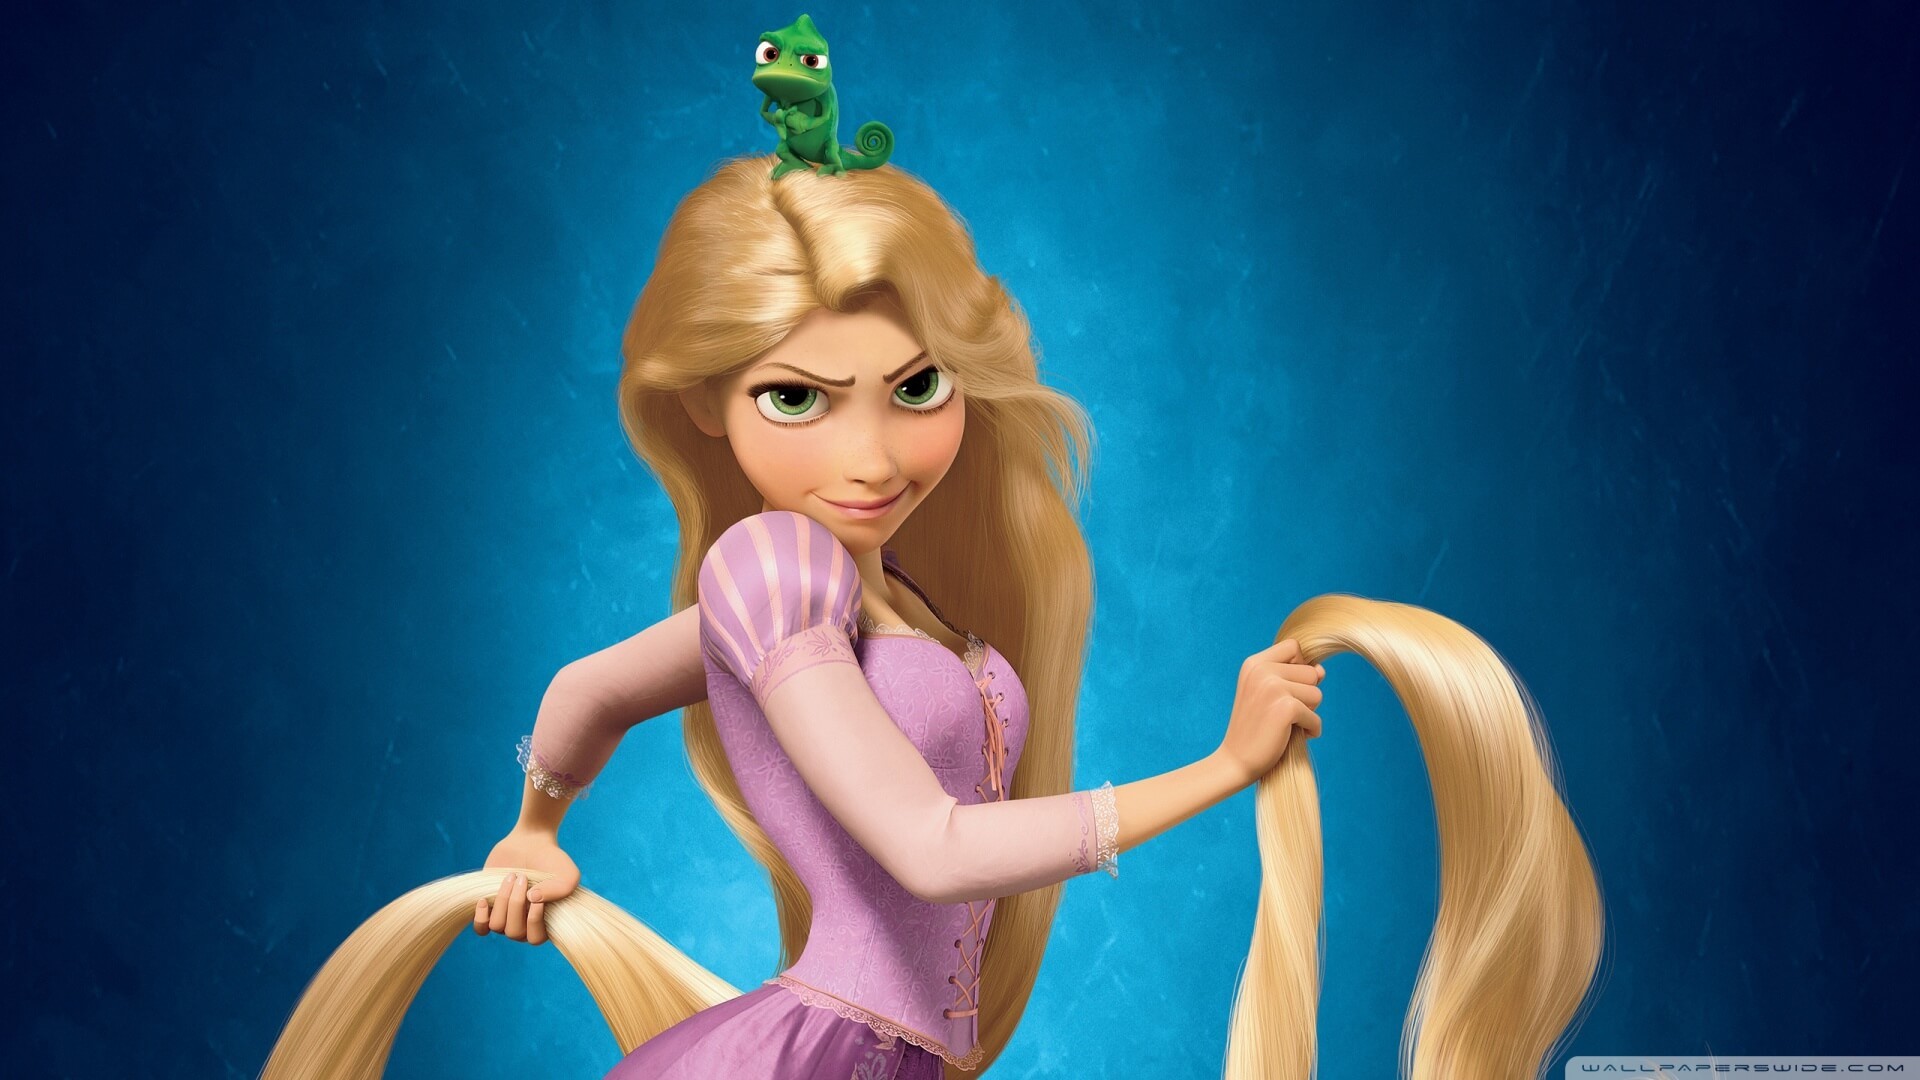 For More Wallpapers For Ipad Click Here - Tangled Rapunzel - HD Wallpaper 